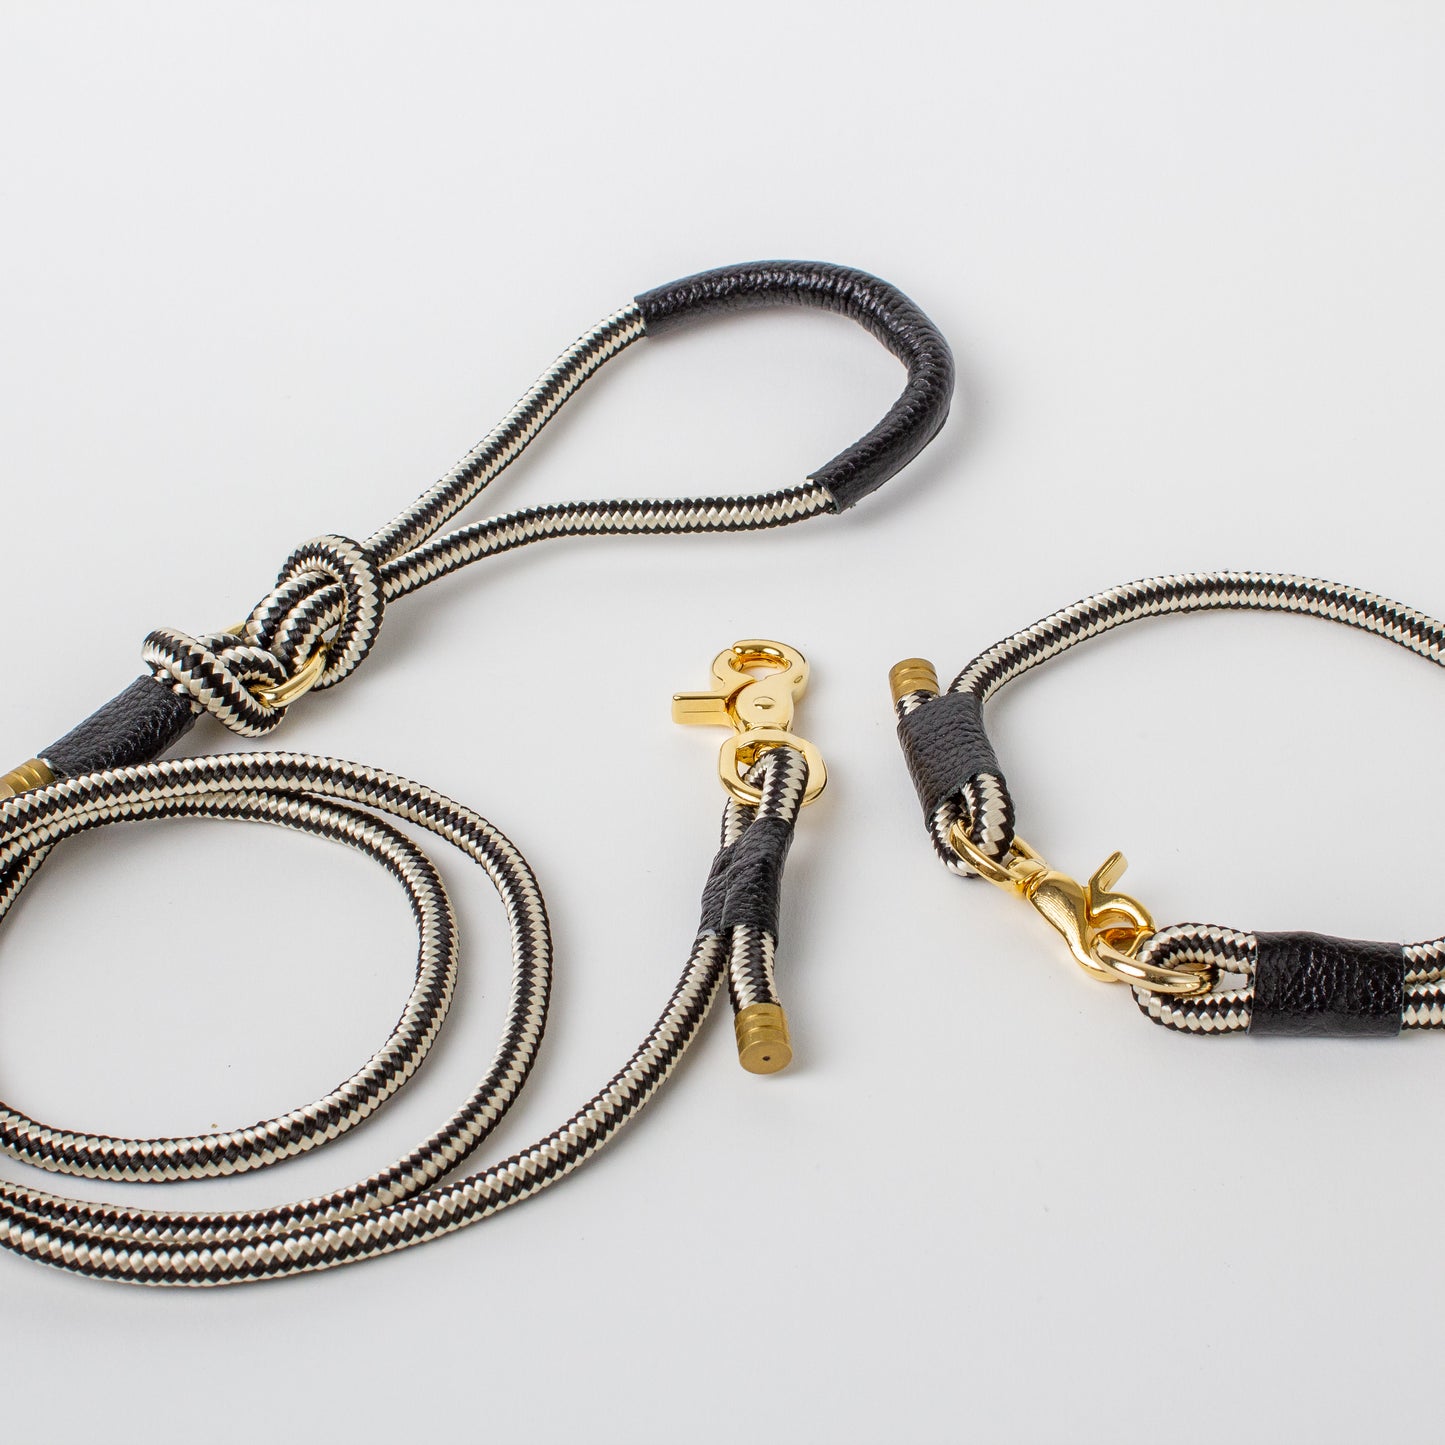 Willow Walks marine rope lead with leather details in black and white